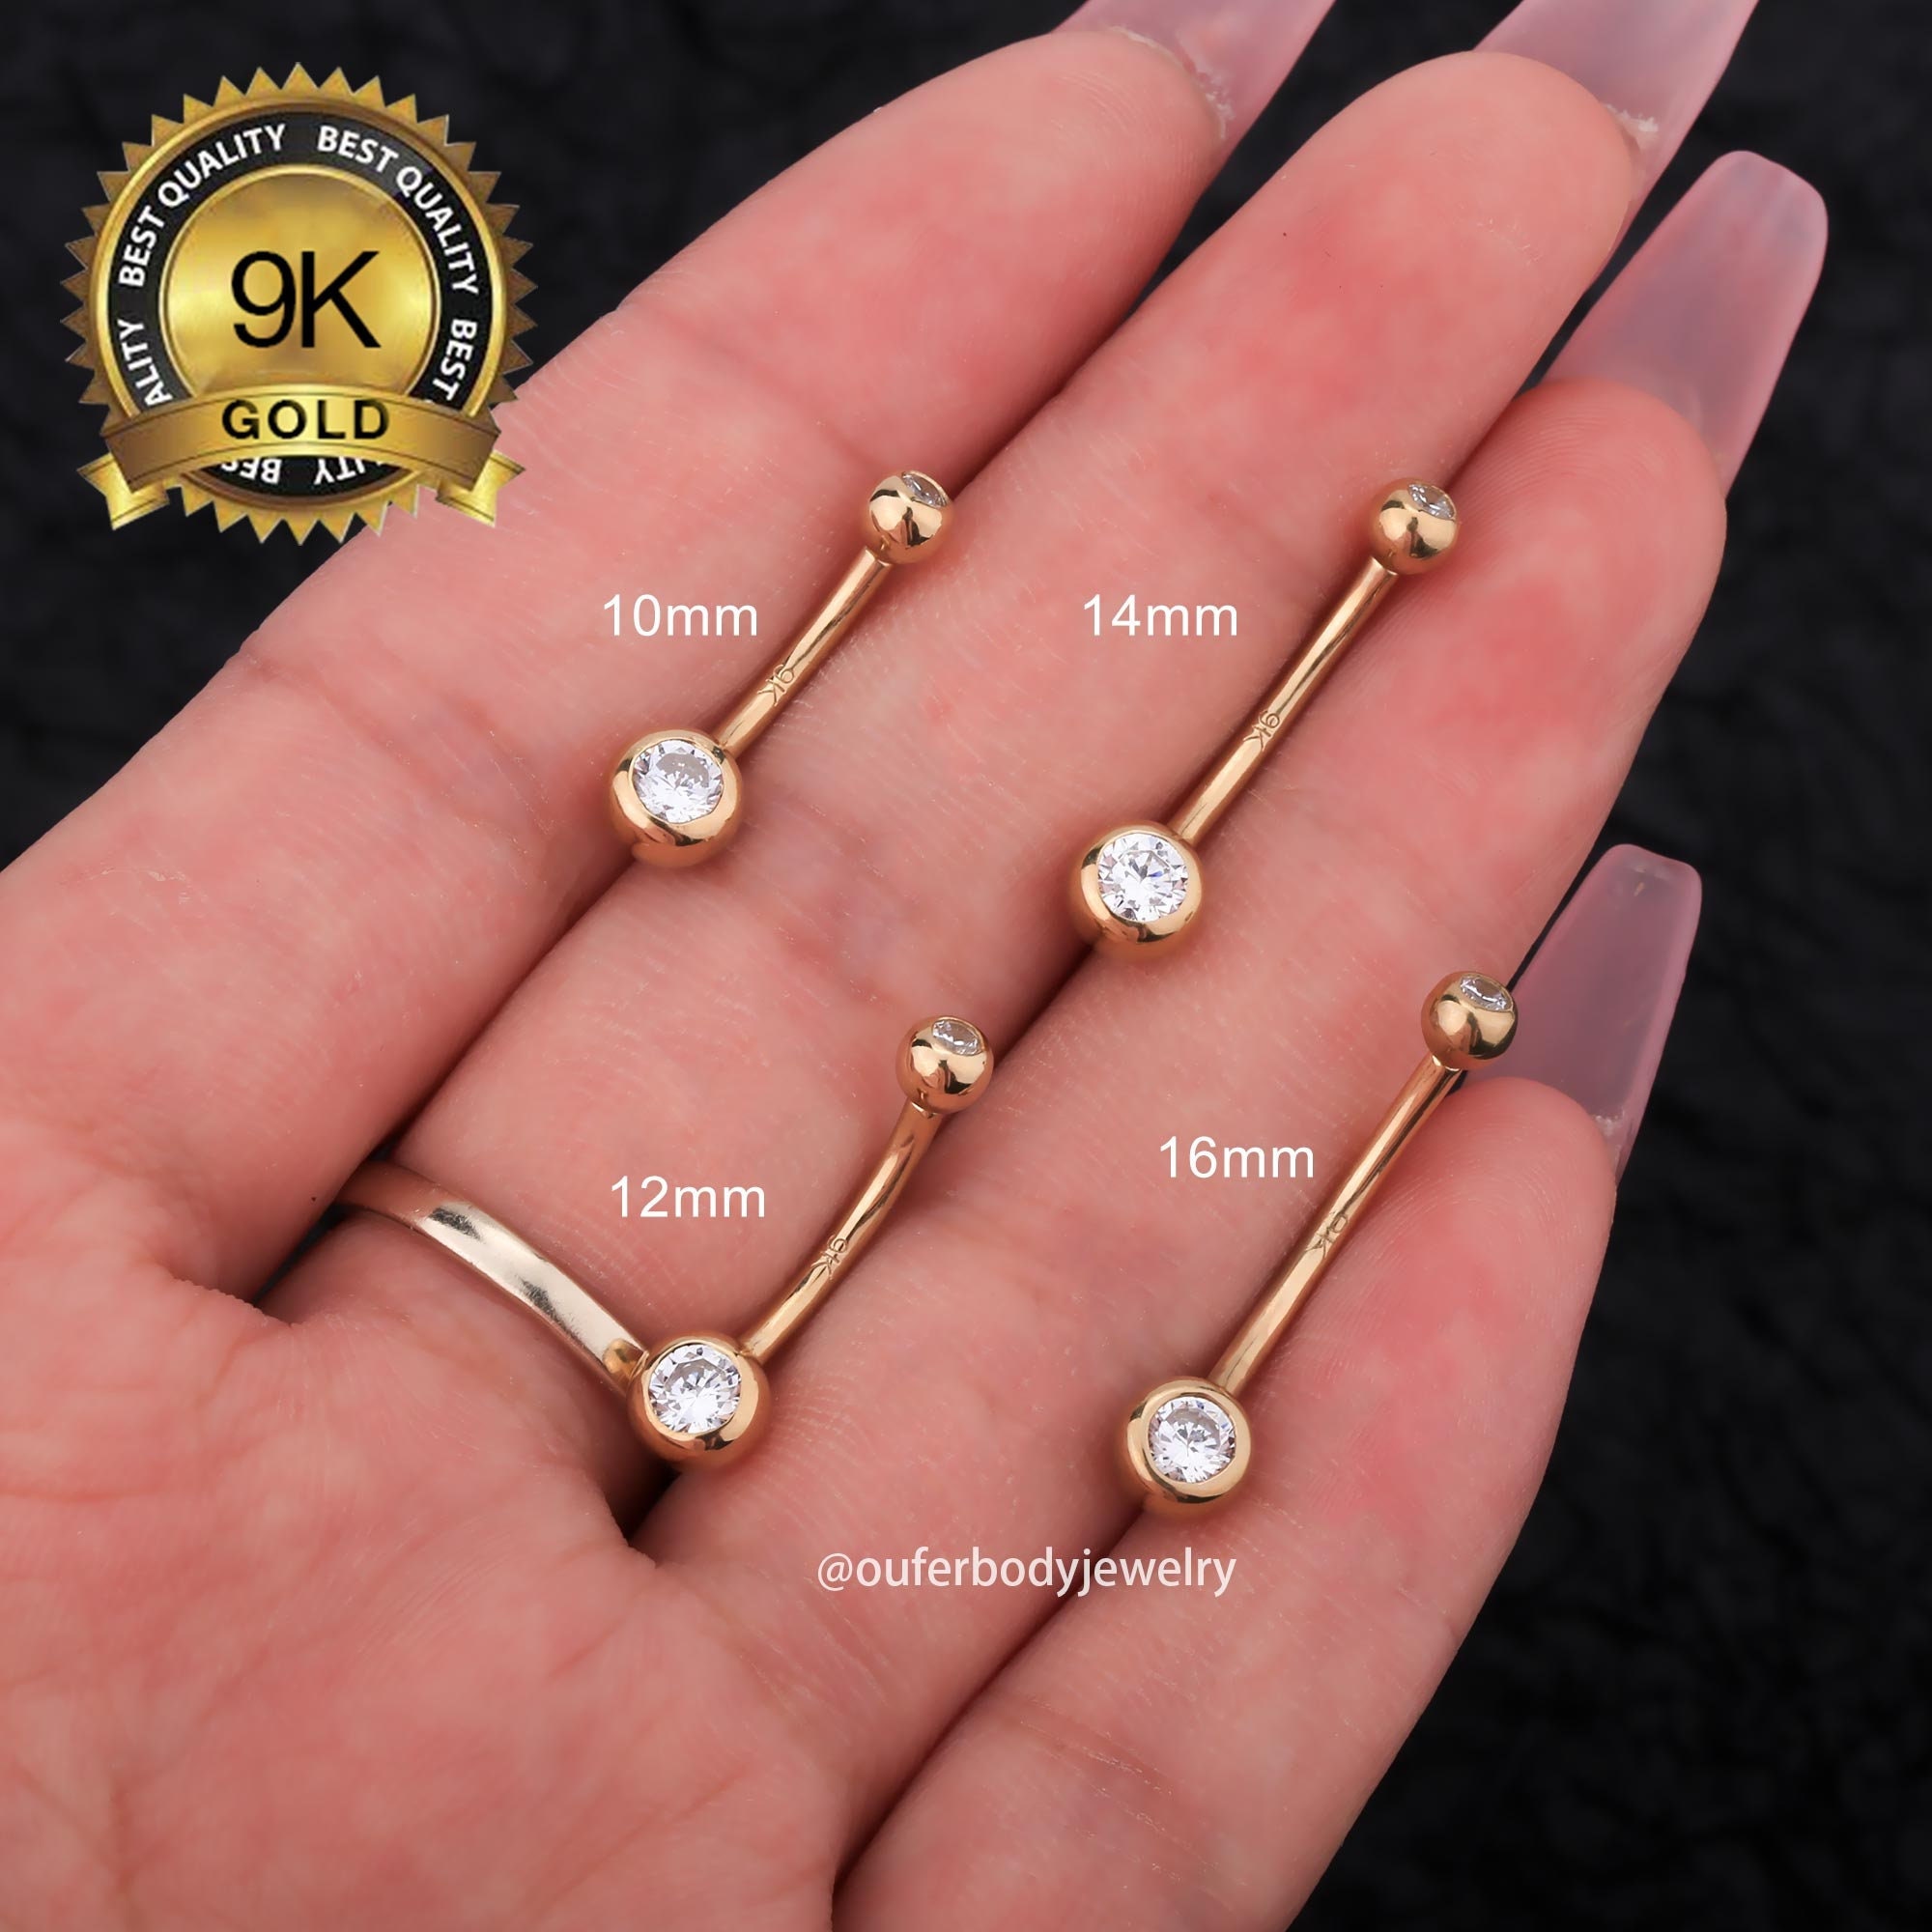 14G Long Belly Ring 12/14/16mm Navel Piercing Jewelry Reverse Belly Button  Rings